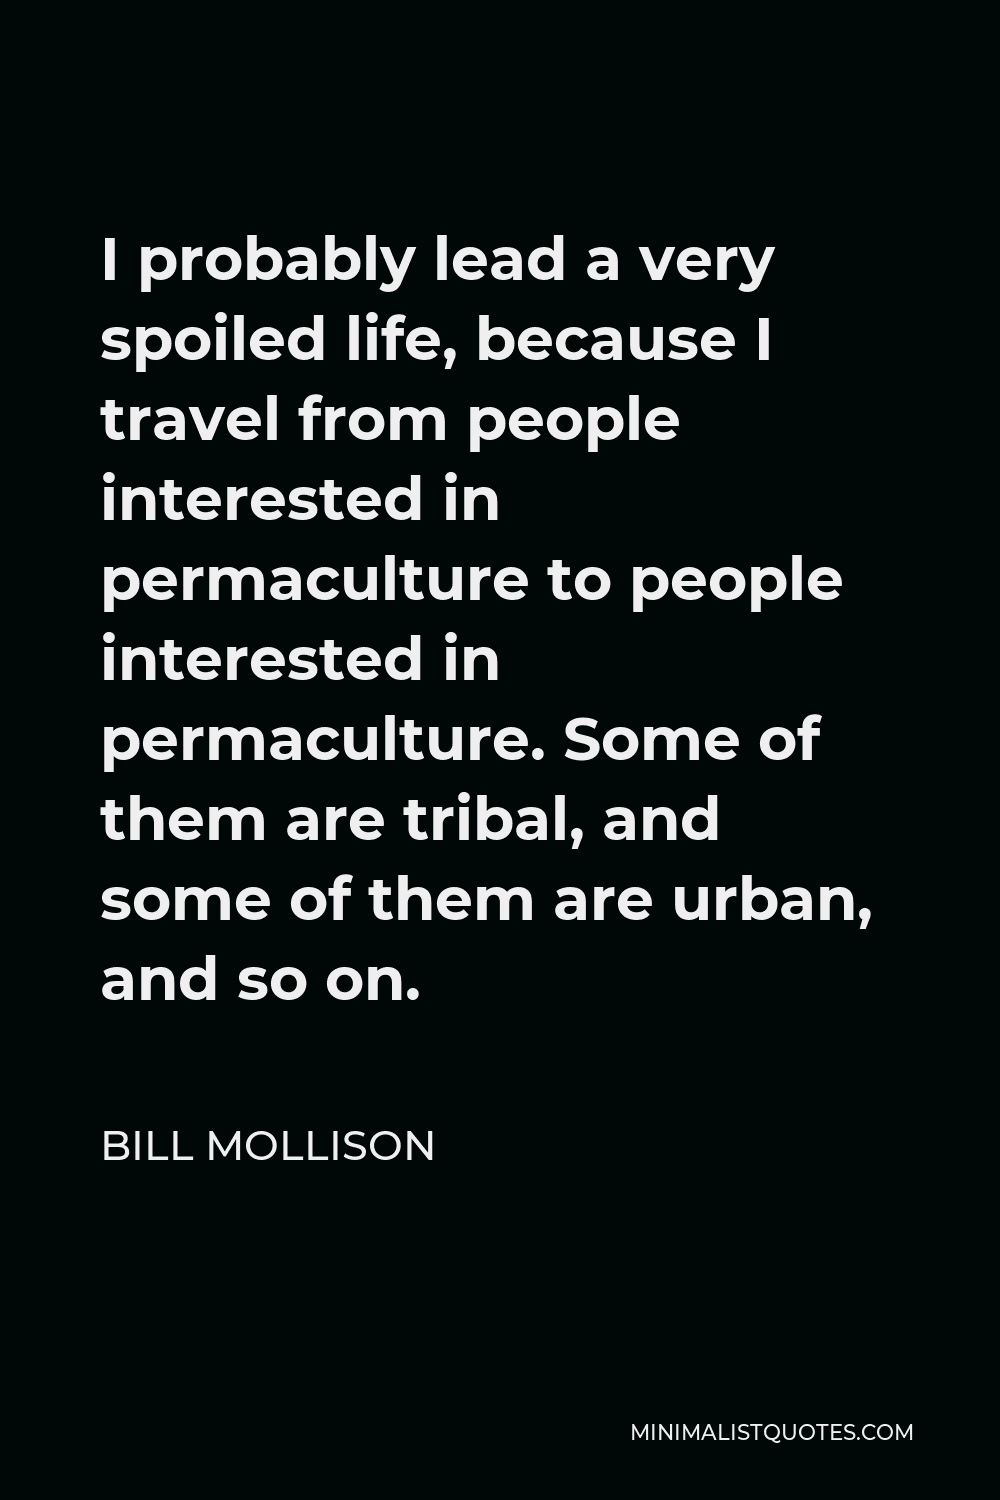 Bill Mollison Quote - I probably lead a very spoiled life, because I travel from people interested in permaculture to people interested in permaculture. Some of them are tribal, and some of them are urban, and so on.